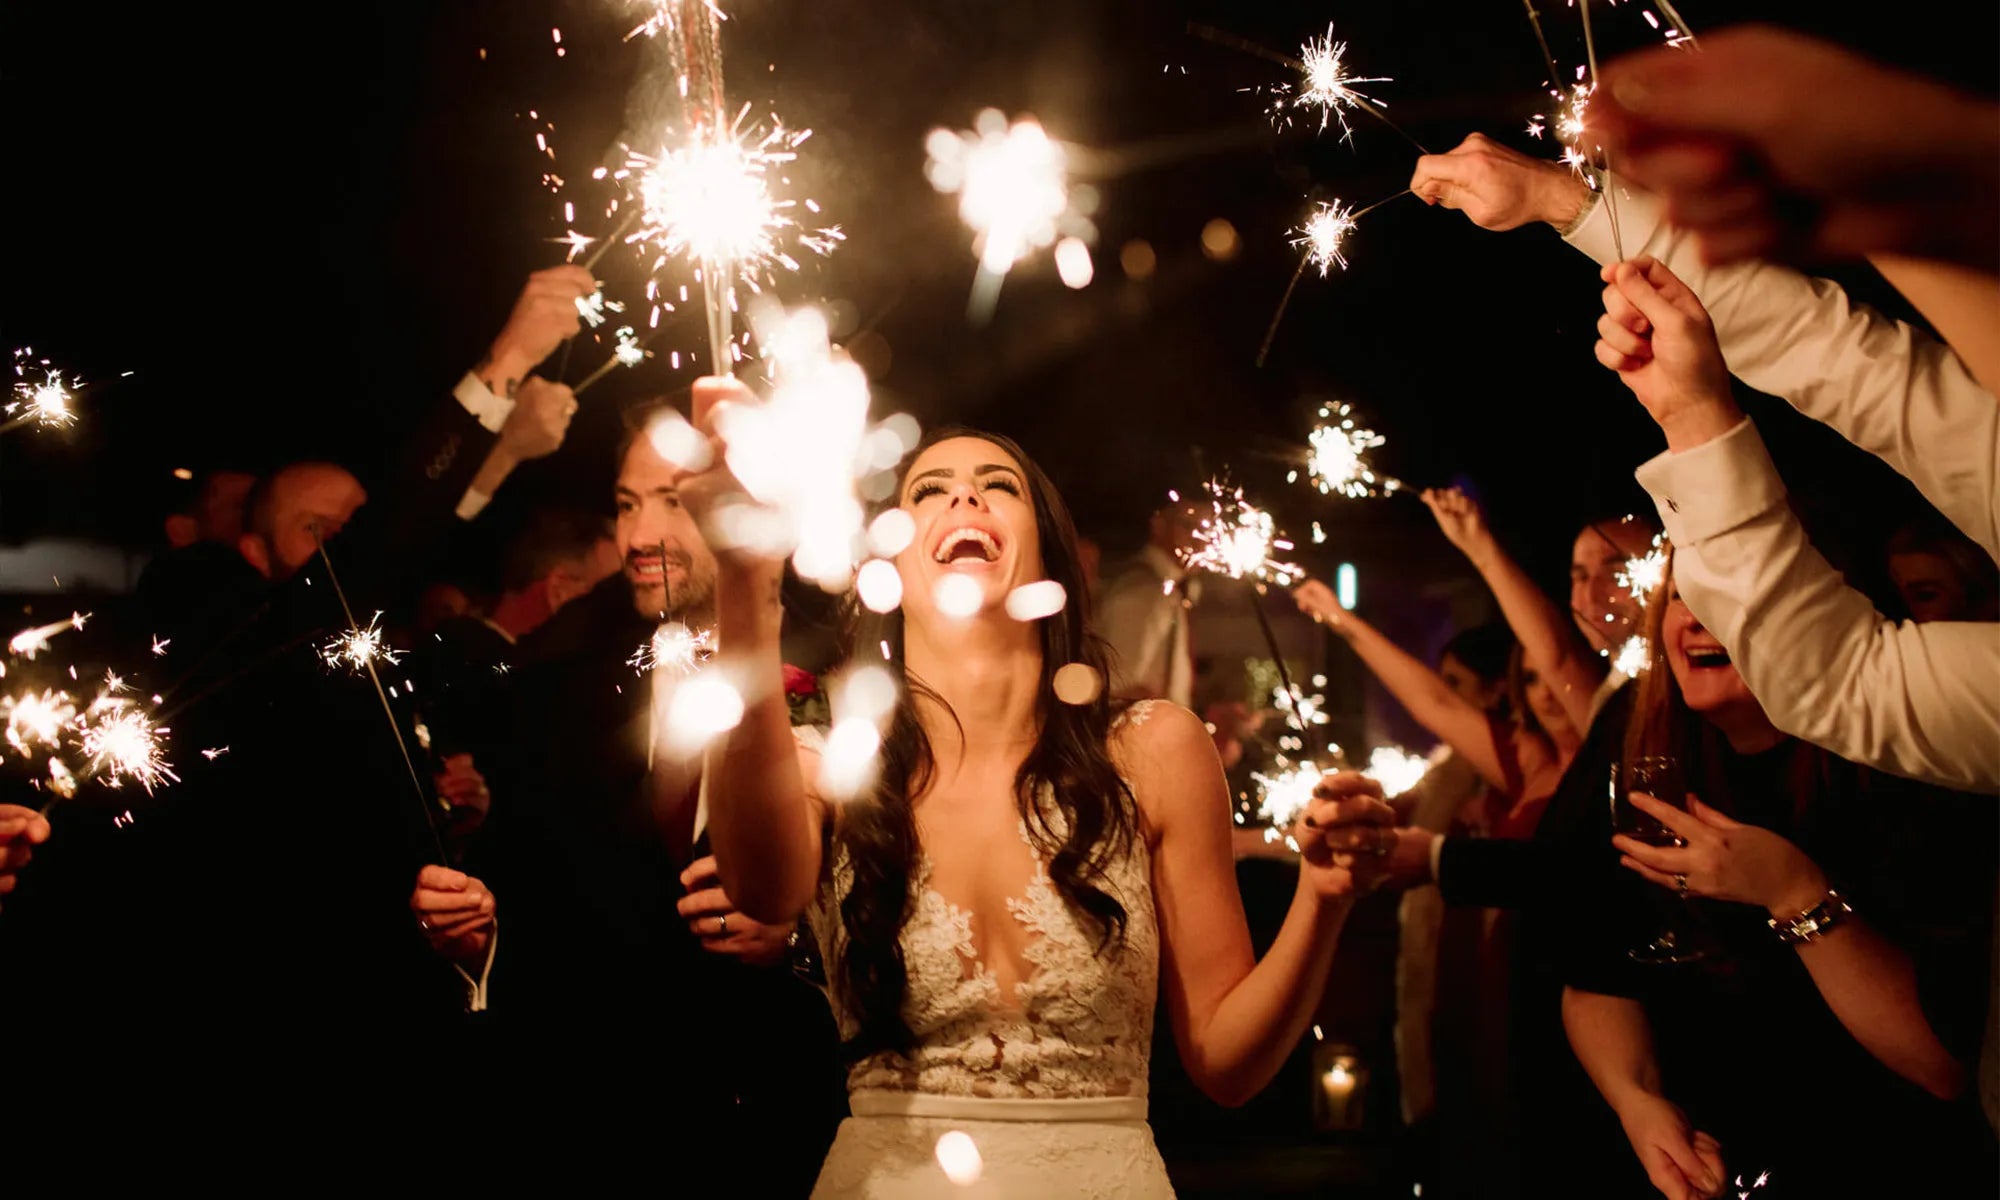 Couple exits in a wedding sparklers send off with no smoke in picture